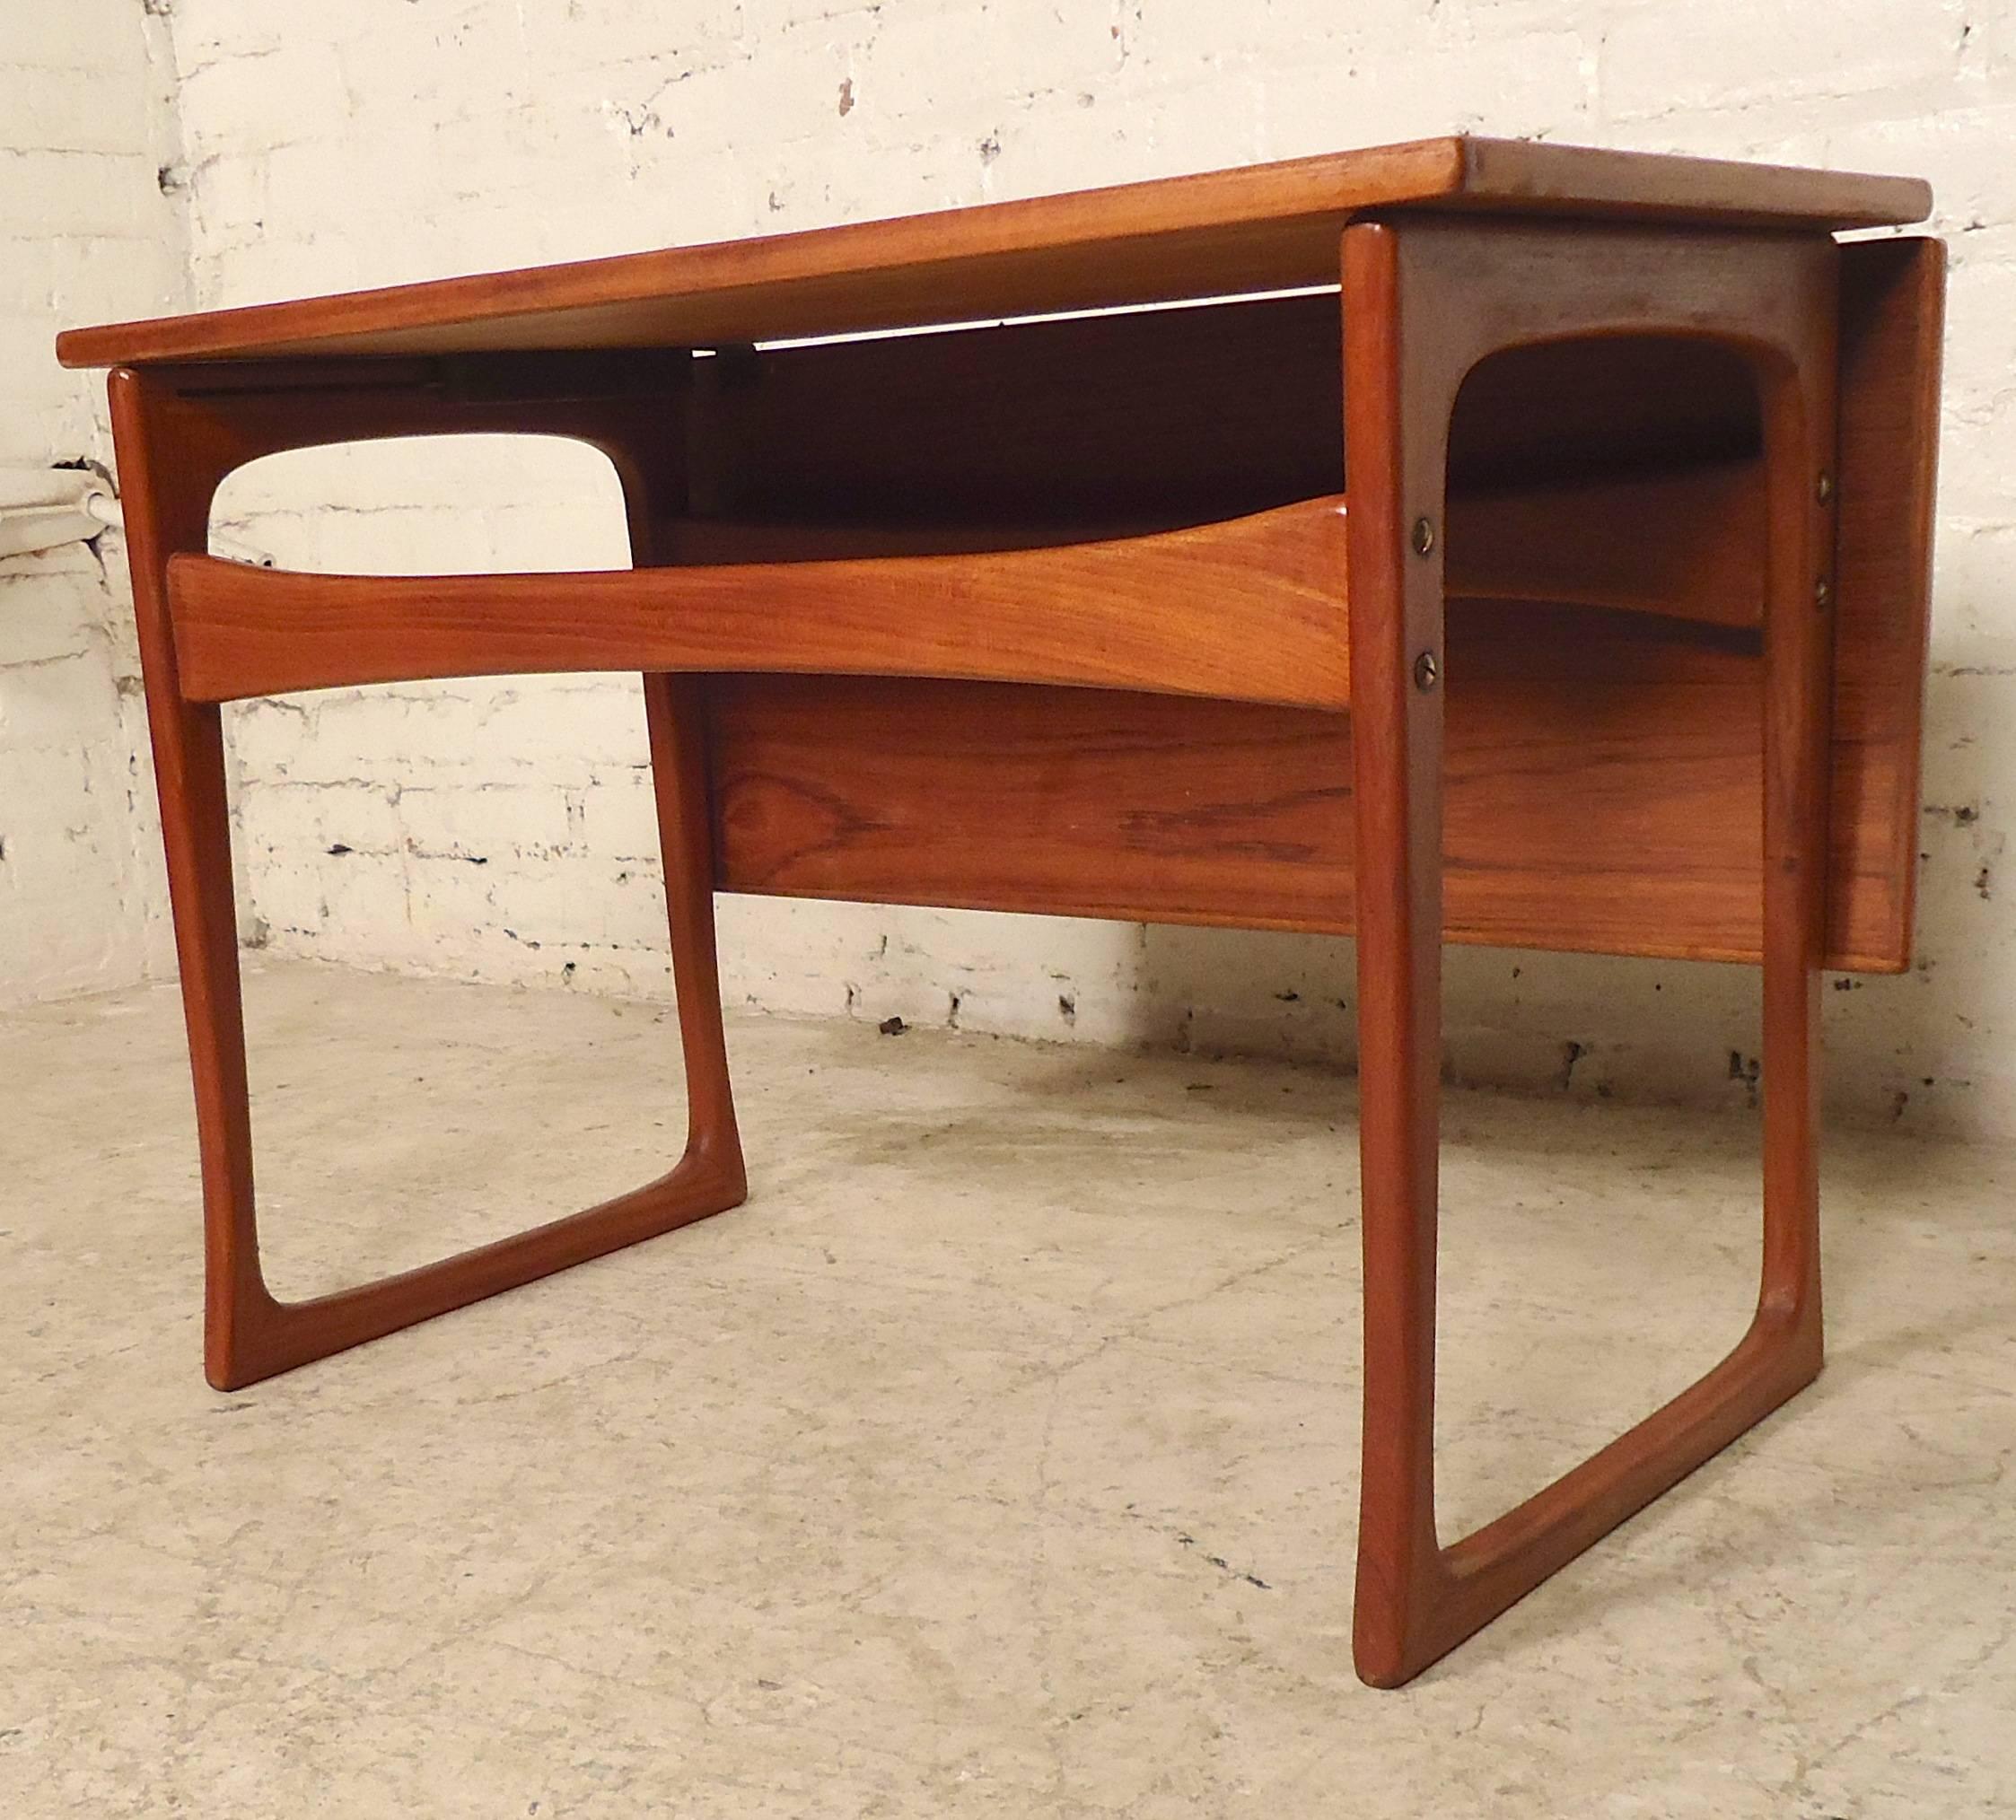 Vintage modern teak side table with sliding top that extends 17-28